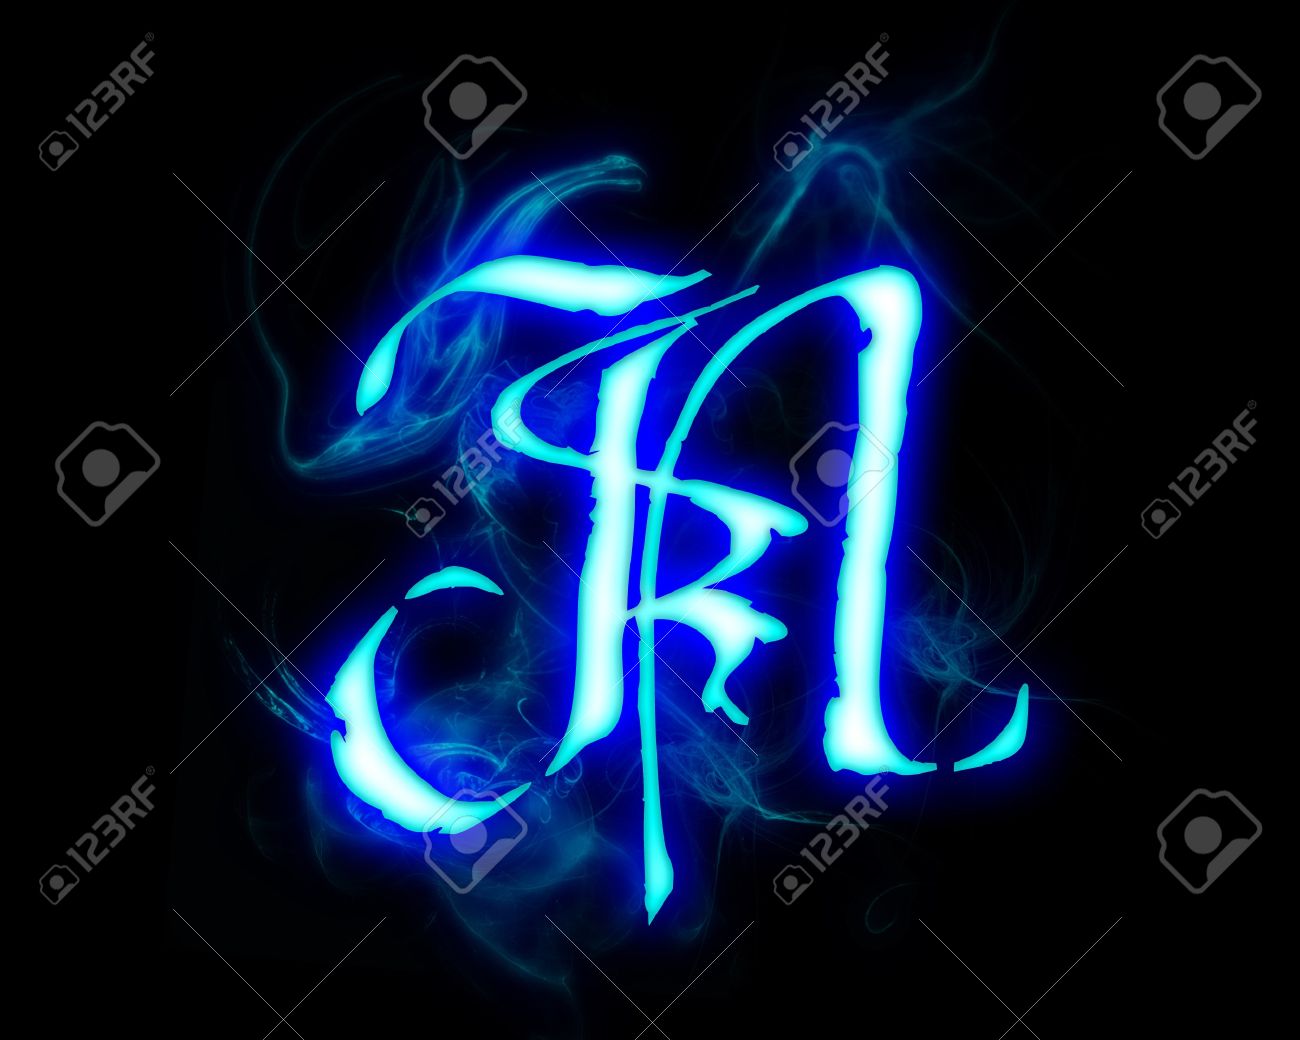 Blue Flame Magic Font Over Black Background Letter N Stock Photo